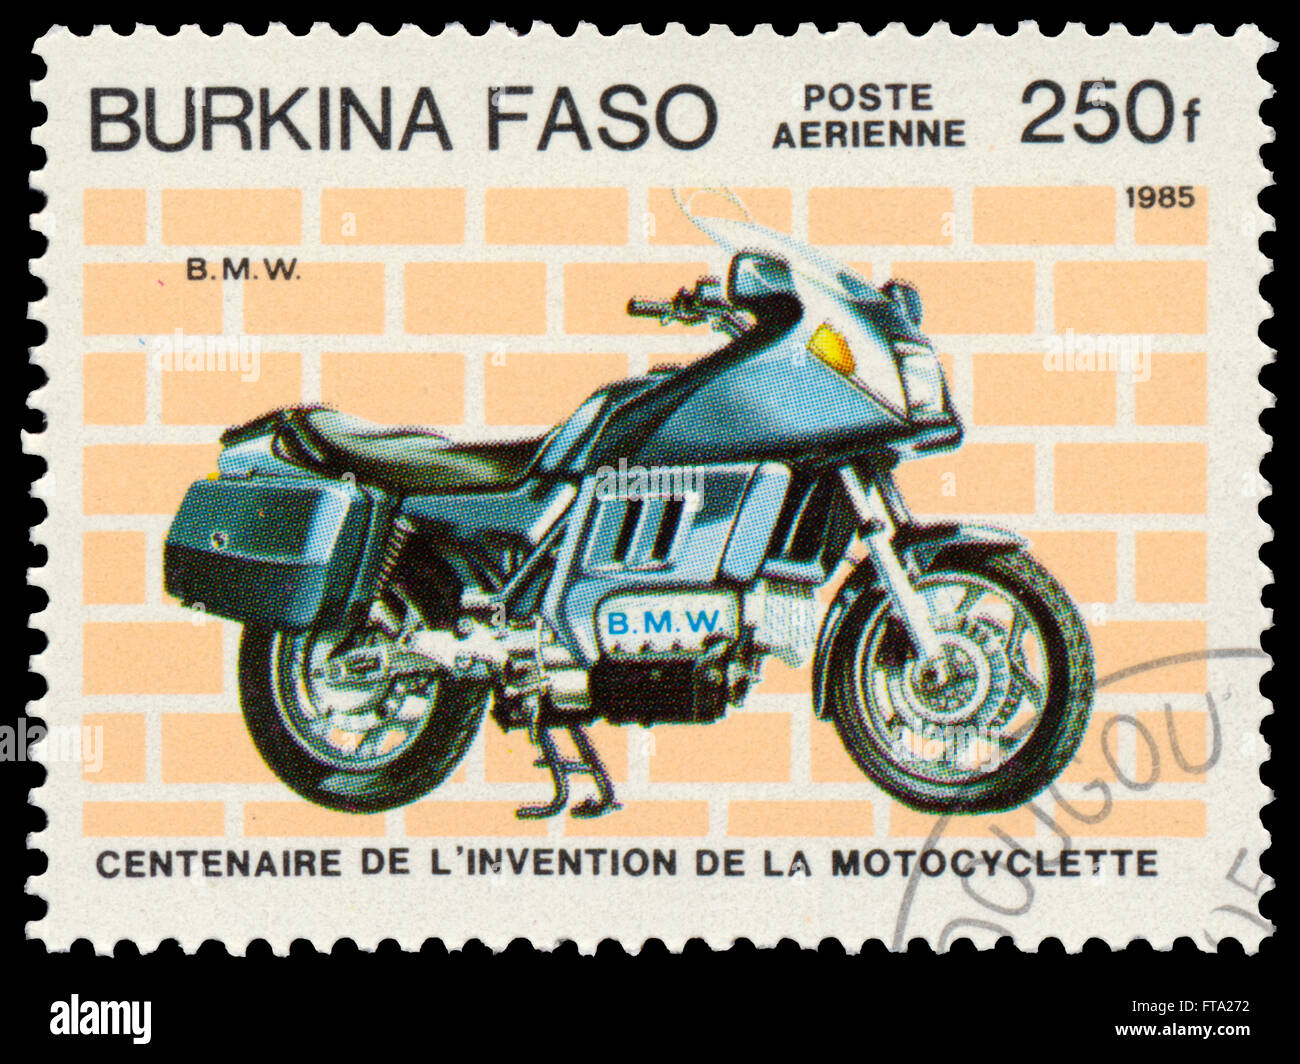 BUDAPEST, HUNGARY - 18 march 2016:  a stamp printed in Burkina Faso shows image of a vintage motorcycle, BMW, circa 1985 Stock Photo